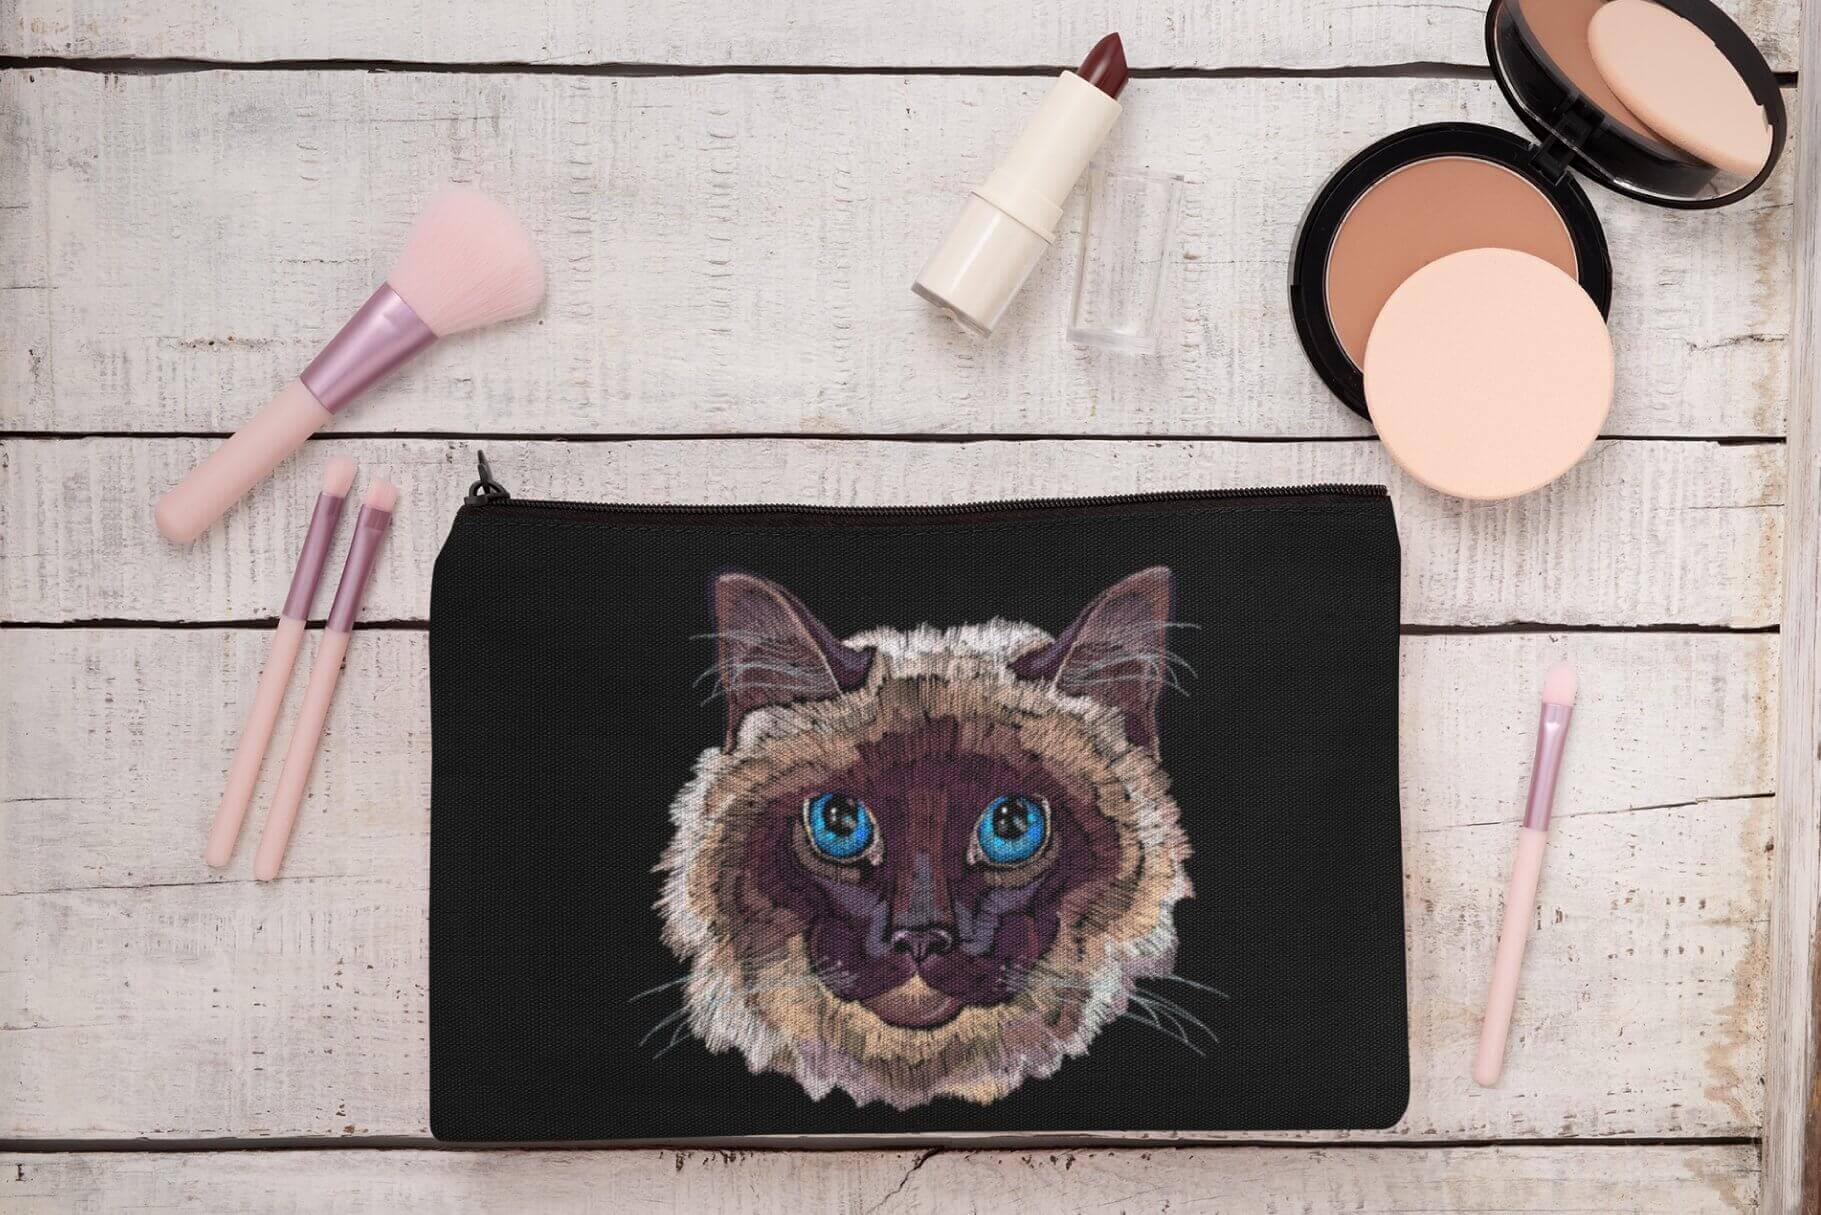 Embroidered Siamese cat with blue eyes on a cosmetic bag.